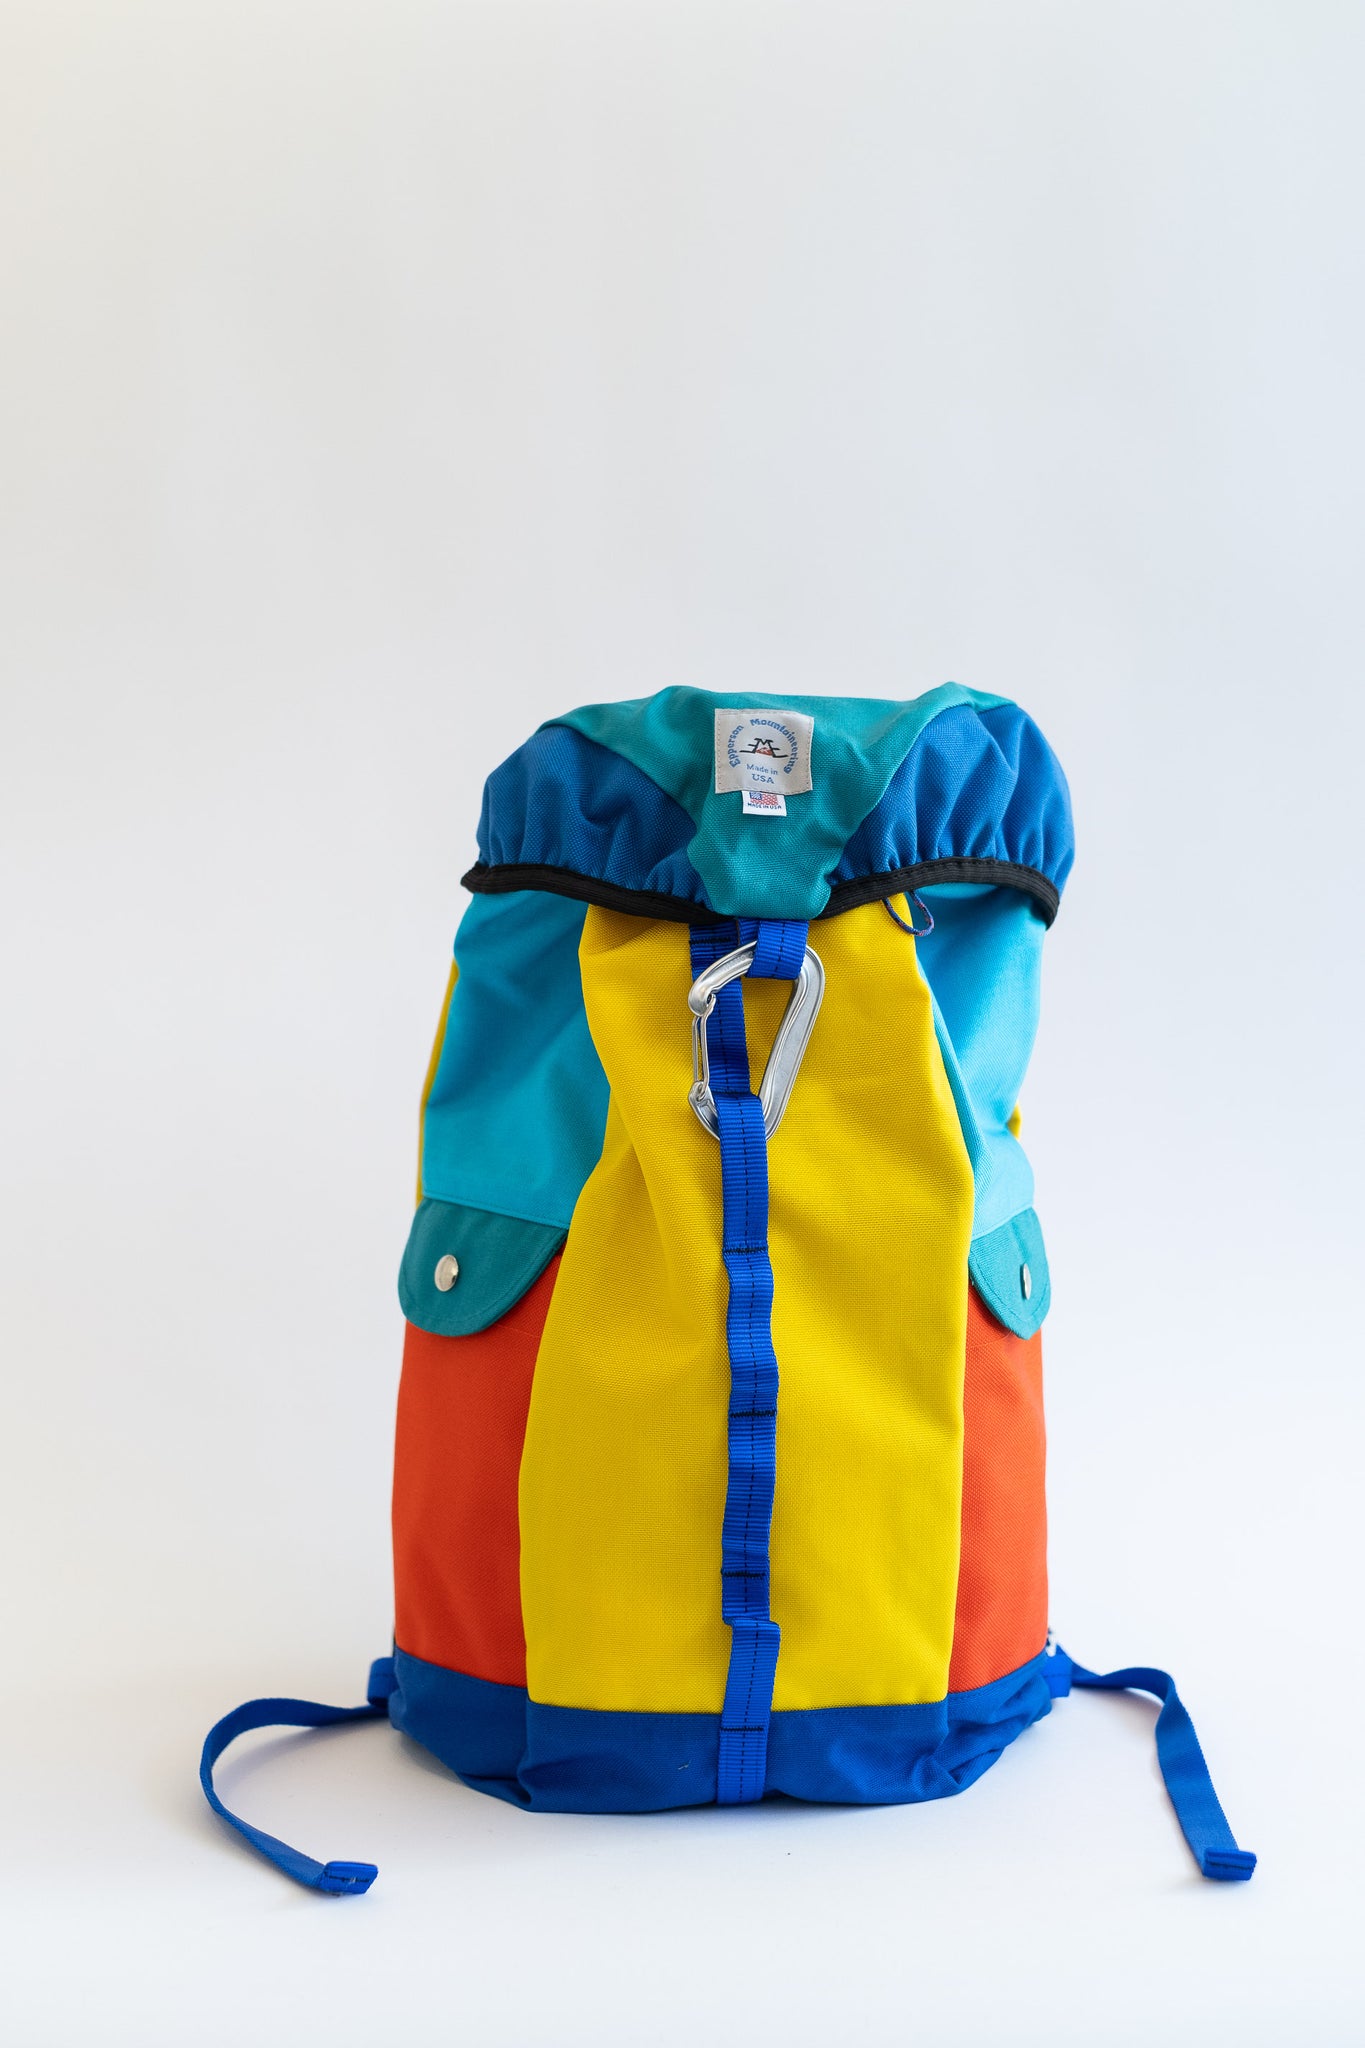 understory-shop - EPPERSON MOUNTAINEERING - MEDIUM CLIMB PACK